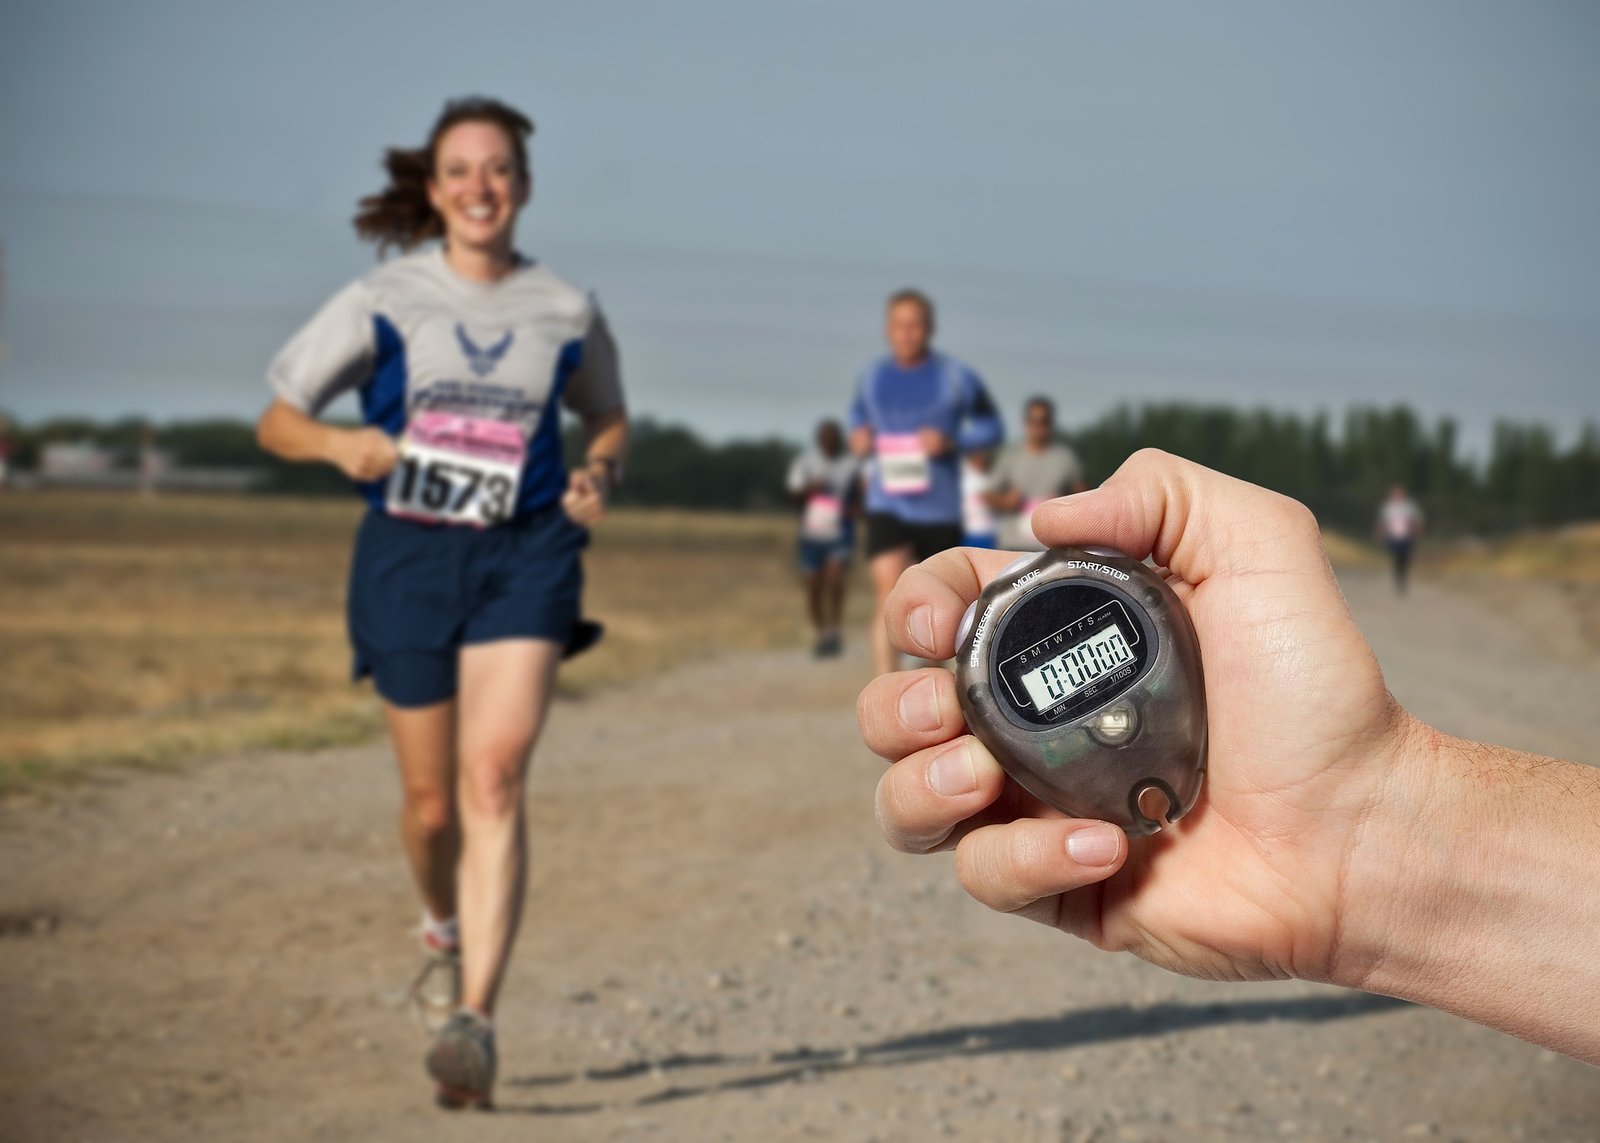 A woman running, and a man holding an old stopwatch. It's time to upgrade to a real GPS running watch!